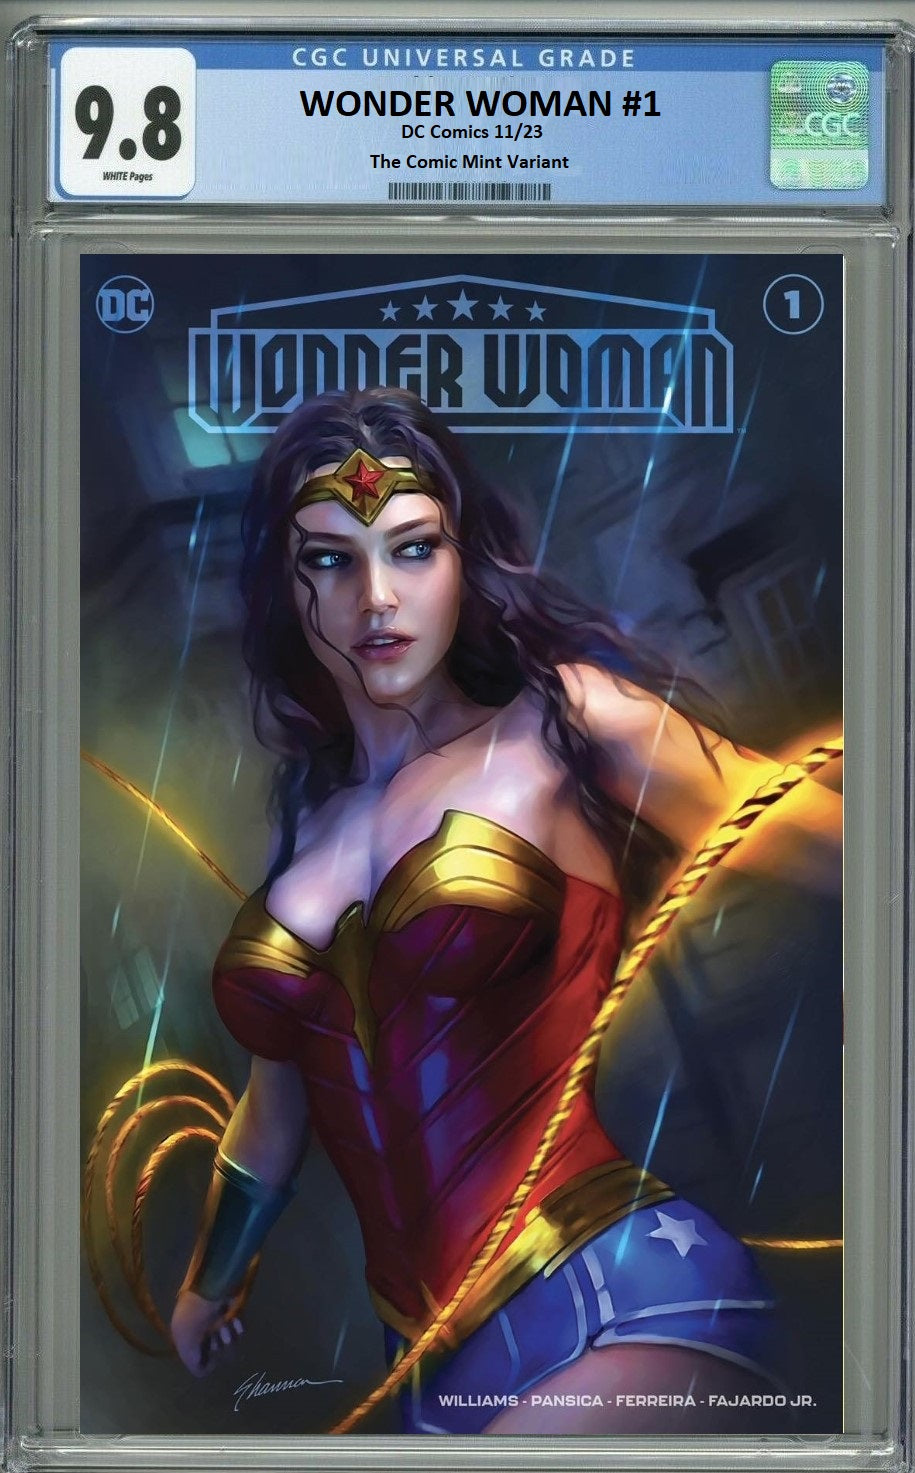 NYCC 2023 WONDER WOMAN #1 SHANNON MAER VARIANT LIMITED TO 1000 COPIES - RAW & GRADED OPTIONS